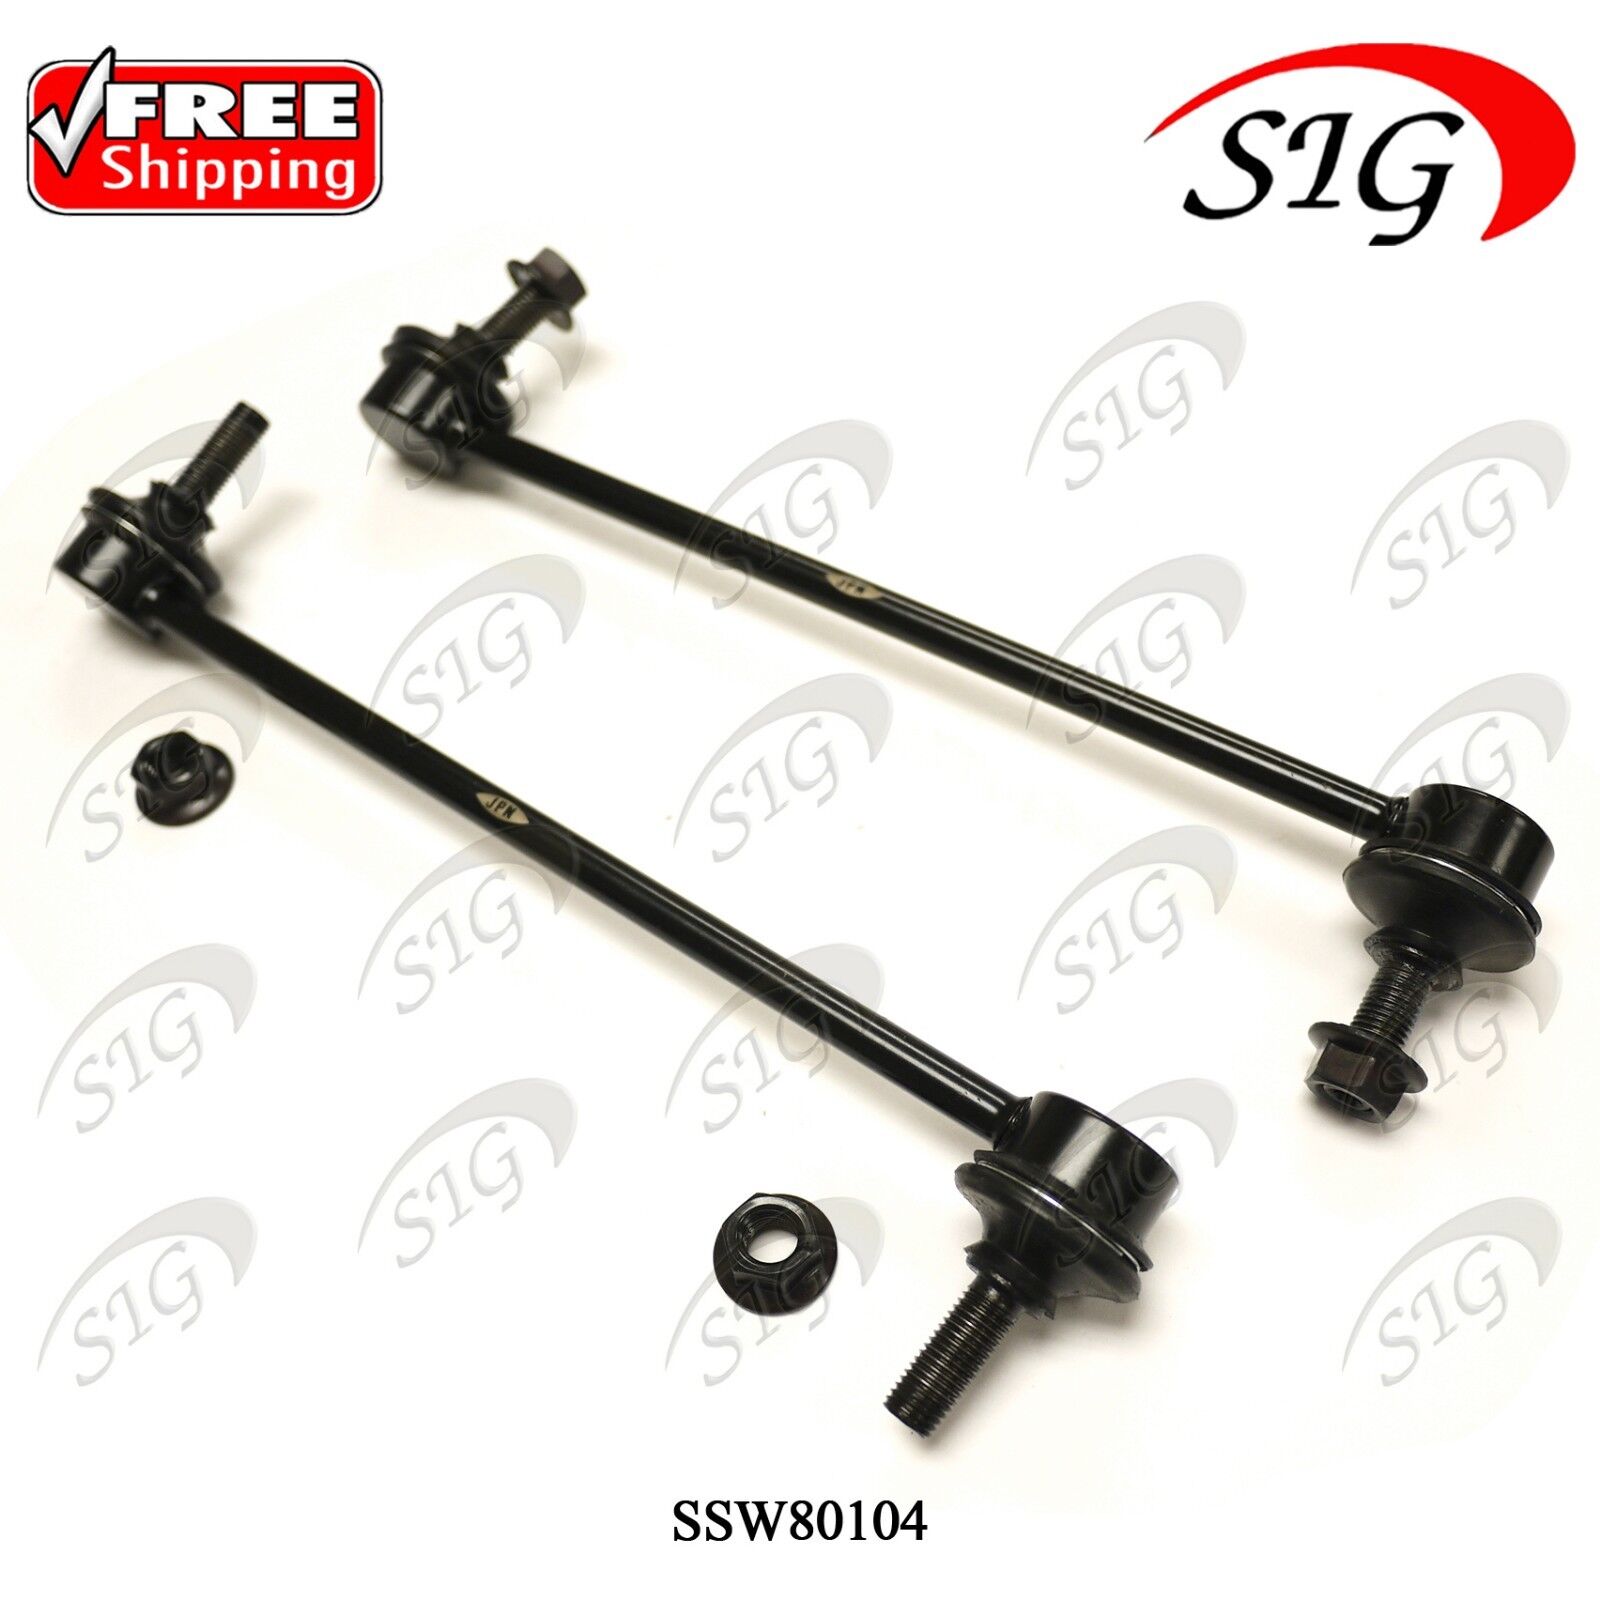 Front Stabilizer Sway Bar Links for Ford Escape 2001-2004 2Pc